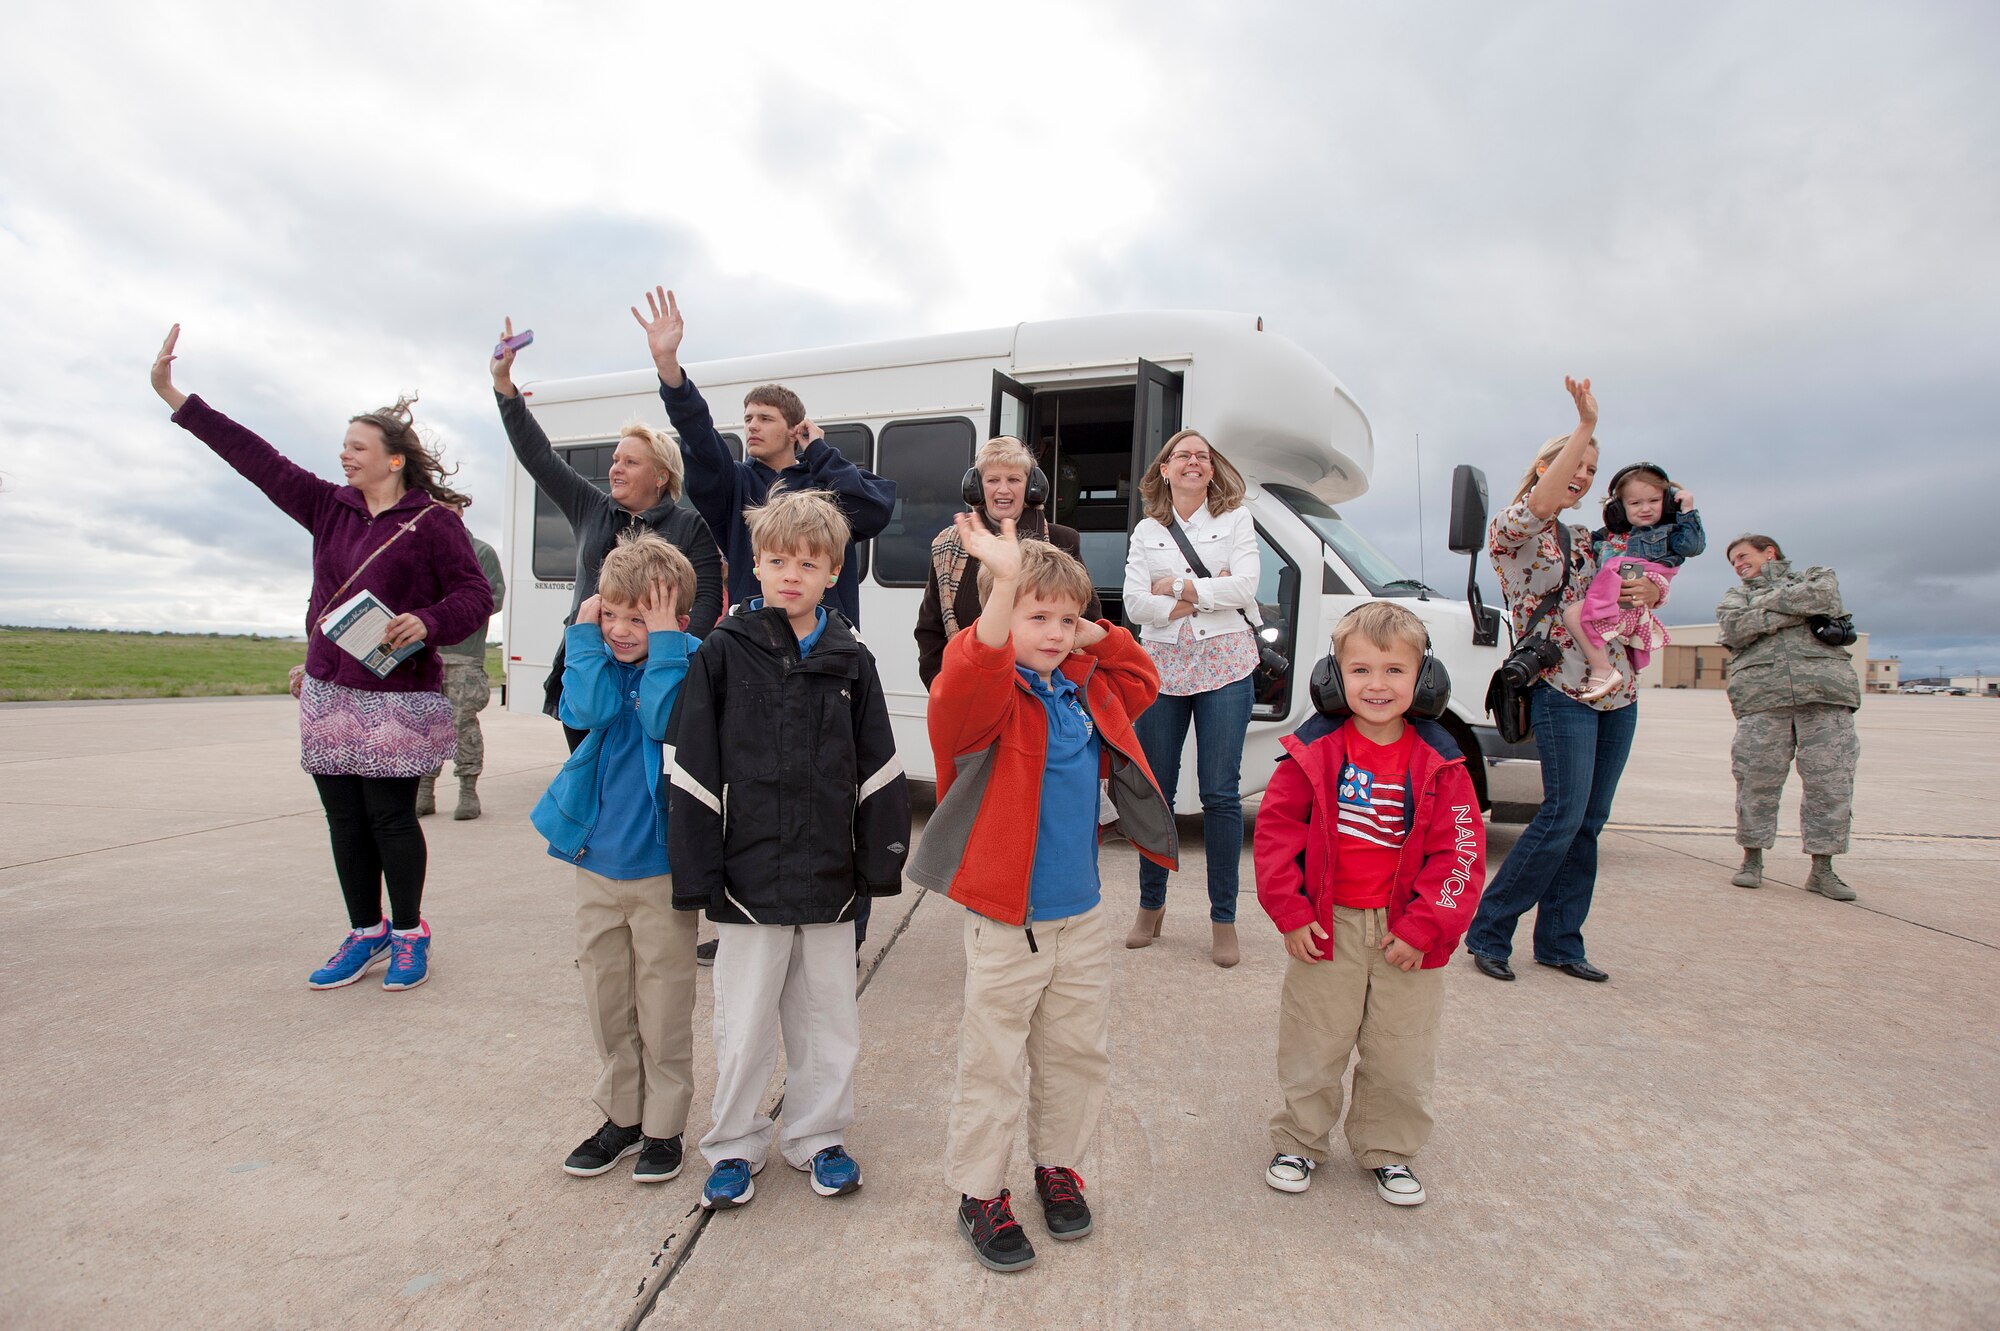 Friends and family welcome back the 120th Fighter Squadron, F-16 Fighting Falcon pilots with the Colorado Air National Guard, at Buckley Air Force Base, Aurora, Colo., after as they return home from a deployment to the Republic of Korea, May 19, 2015. Integrating with other U.S. Air Force members, flying daily training mission and providing a Theater Security Package for the past 90 days, this return home marks the completion of the seventh deployment for the "Redeyes" of the 120th FS along with the 140th Wing since Sept. 11, 2001. (U.S. Air National Guard photo by: Tech. Sgt. Wolfram M. Stumpf/RELEASED)